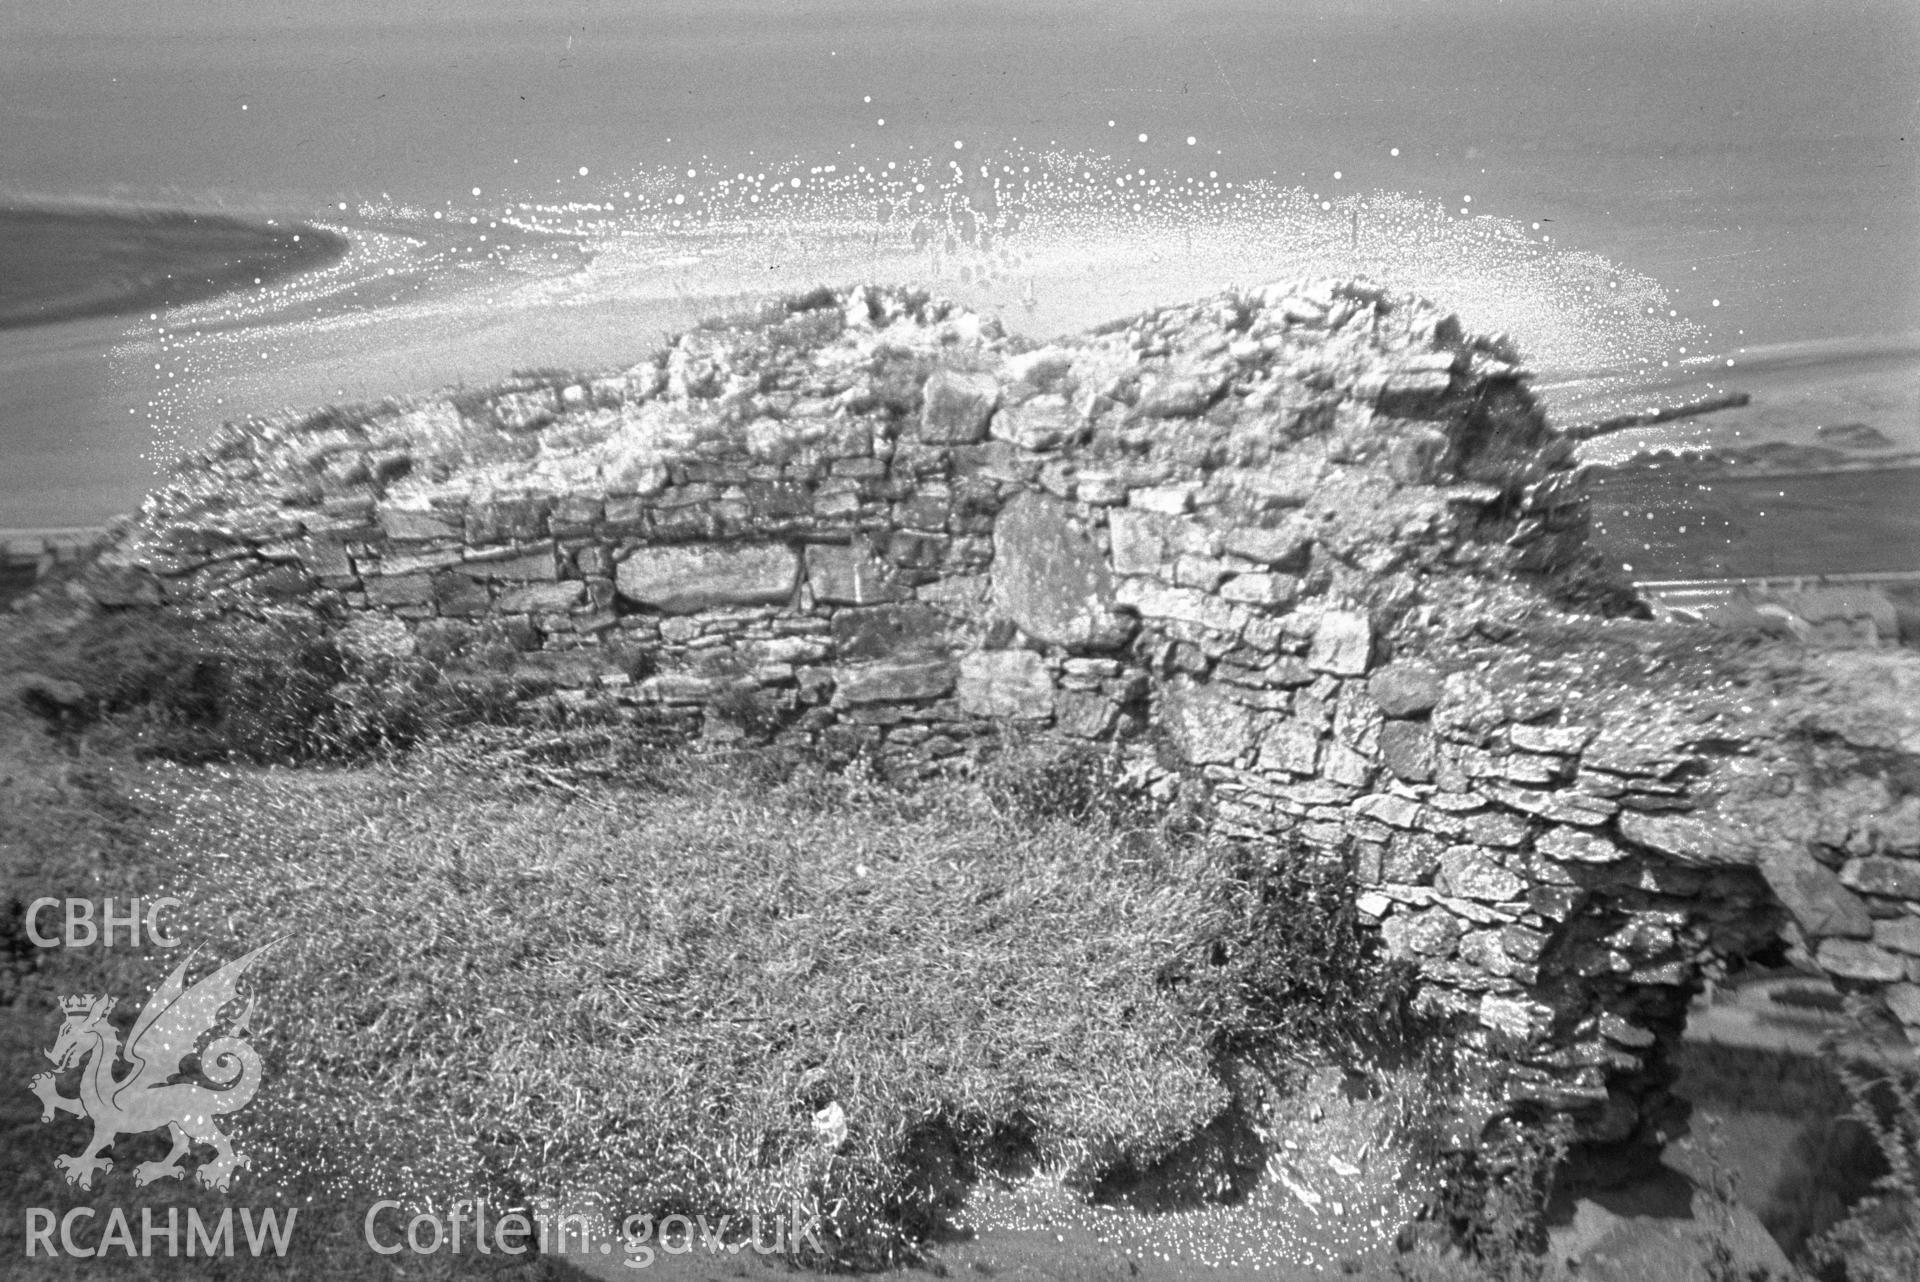 Digital copy of a nitrate negative showing Deganwy Castle.